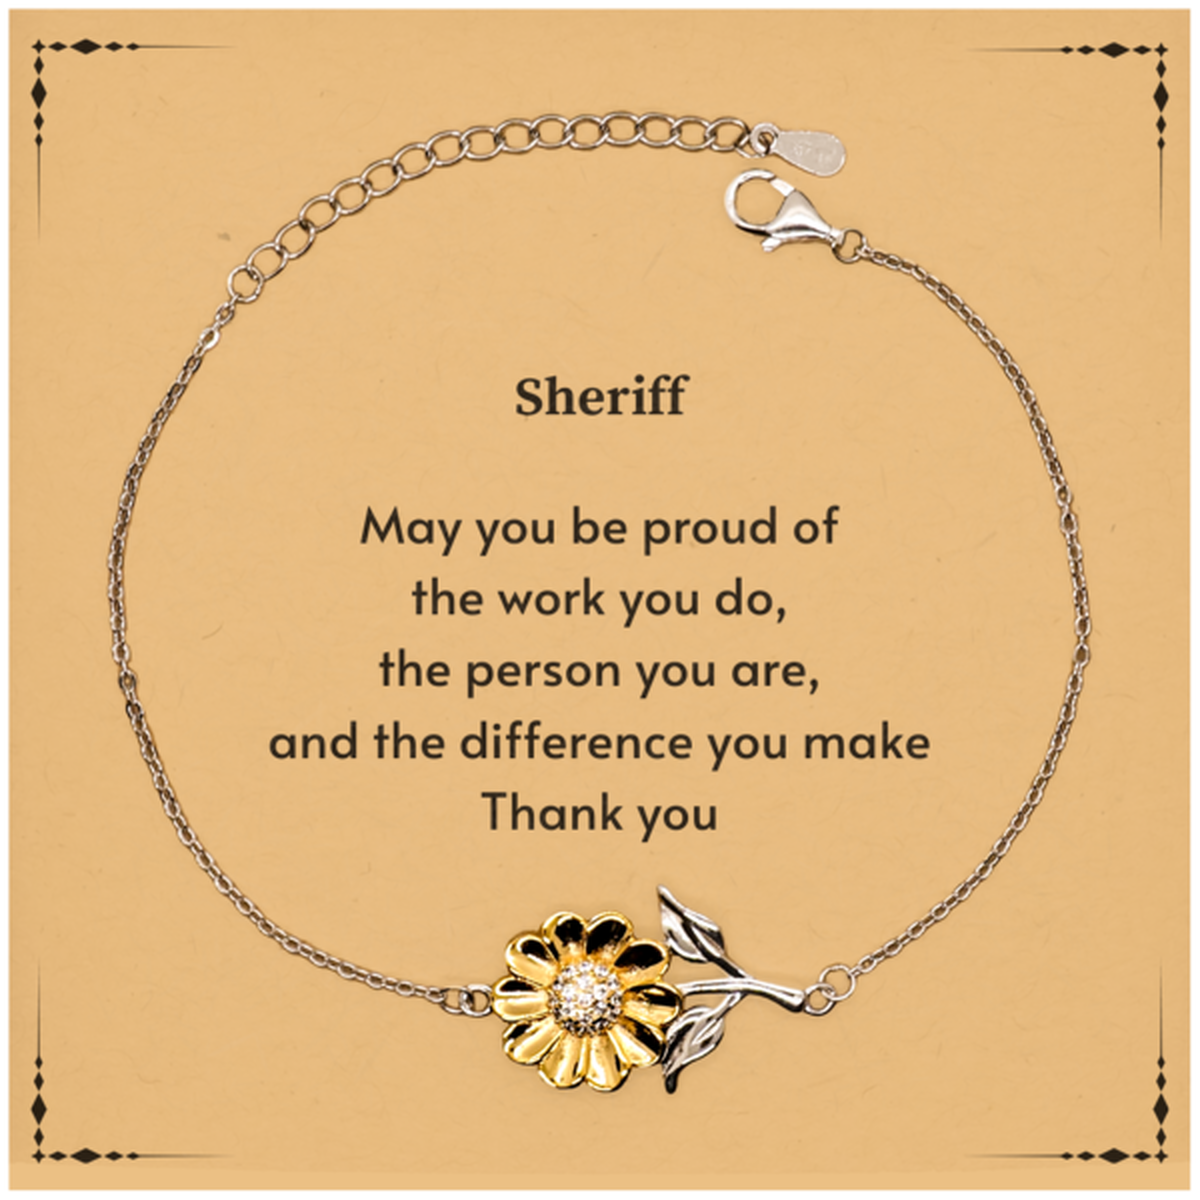 Heartwarming Sunflower Bracelet Retirement Coworkers Gifts for Sheriff, Sheriff May You be proud of the work you do, the person you are Gifts for Boss Men Women Friends